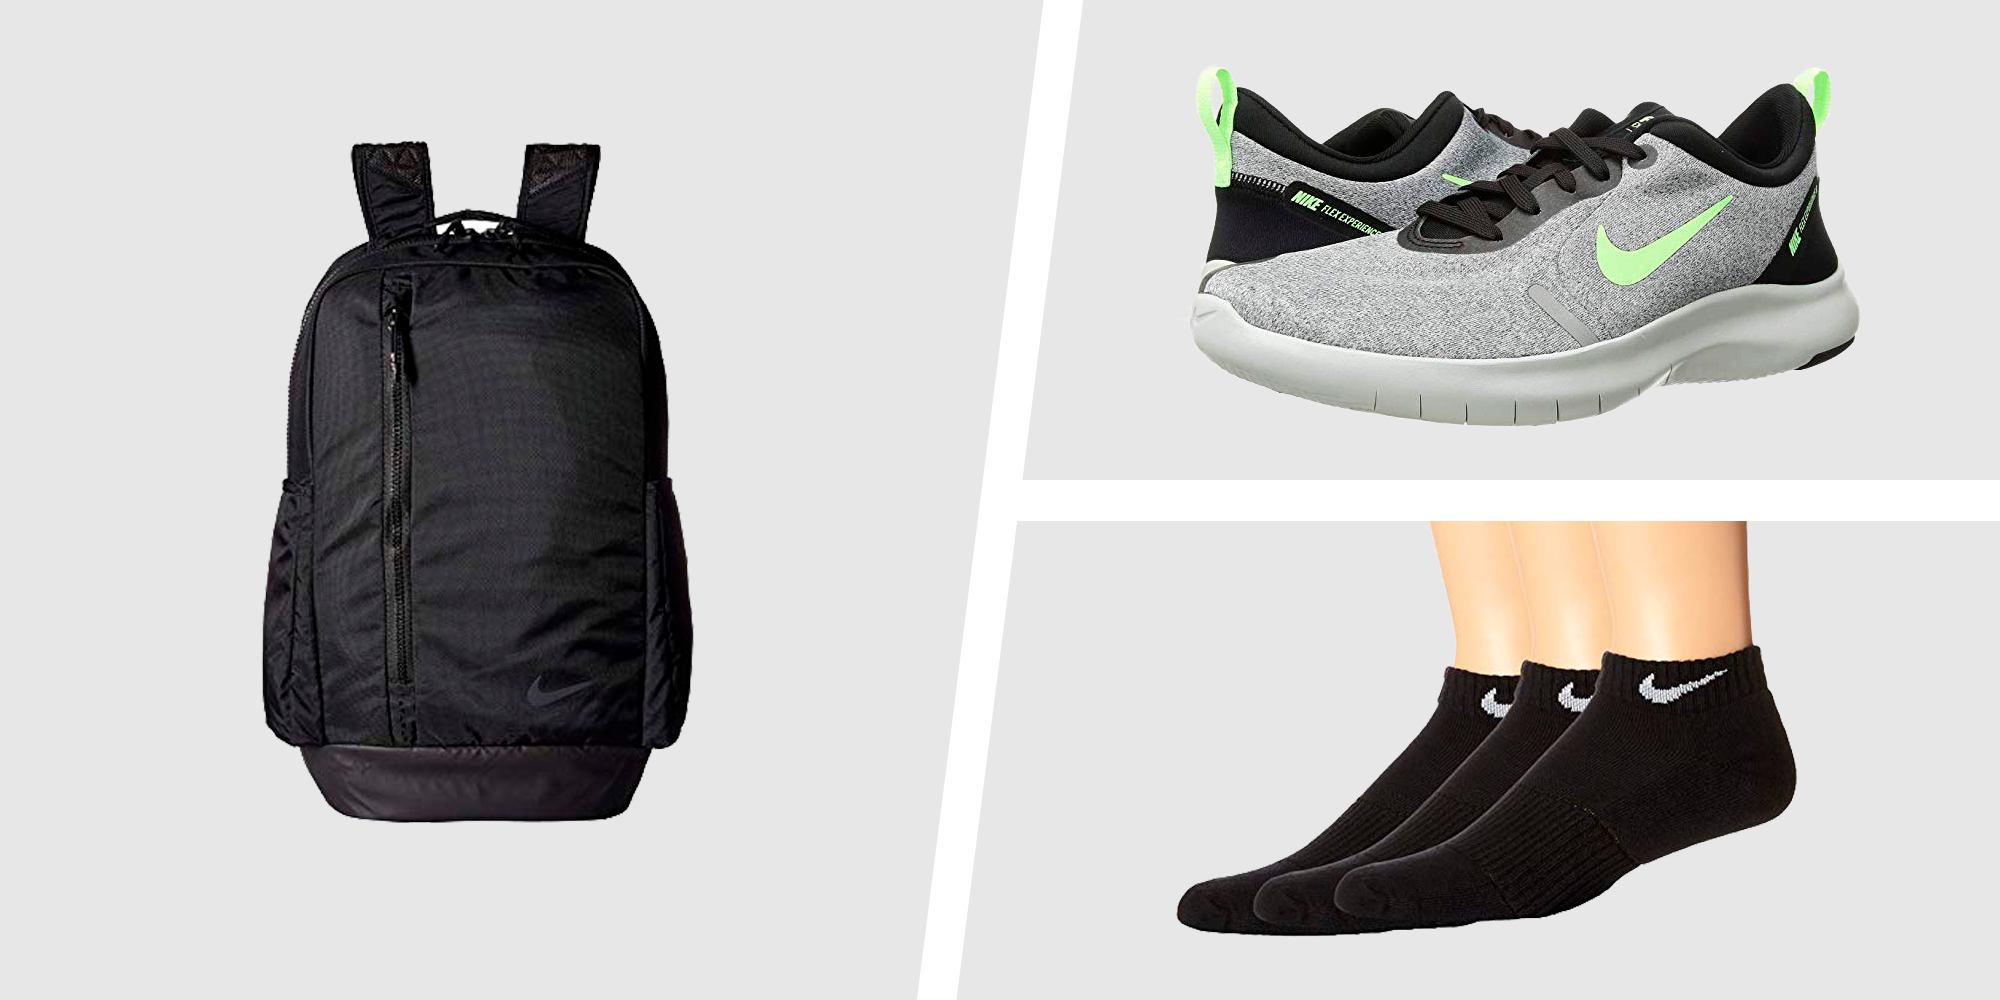 Off Select Nike Styles at Zappos Right now